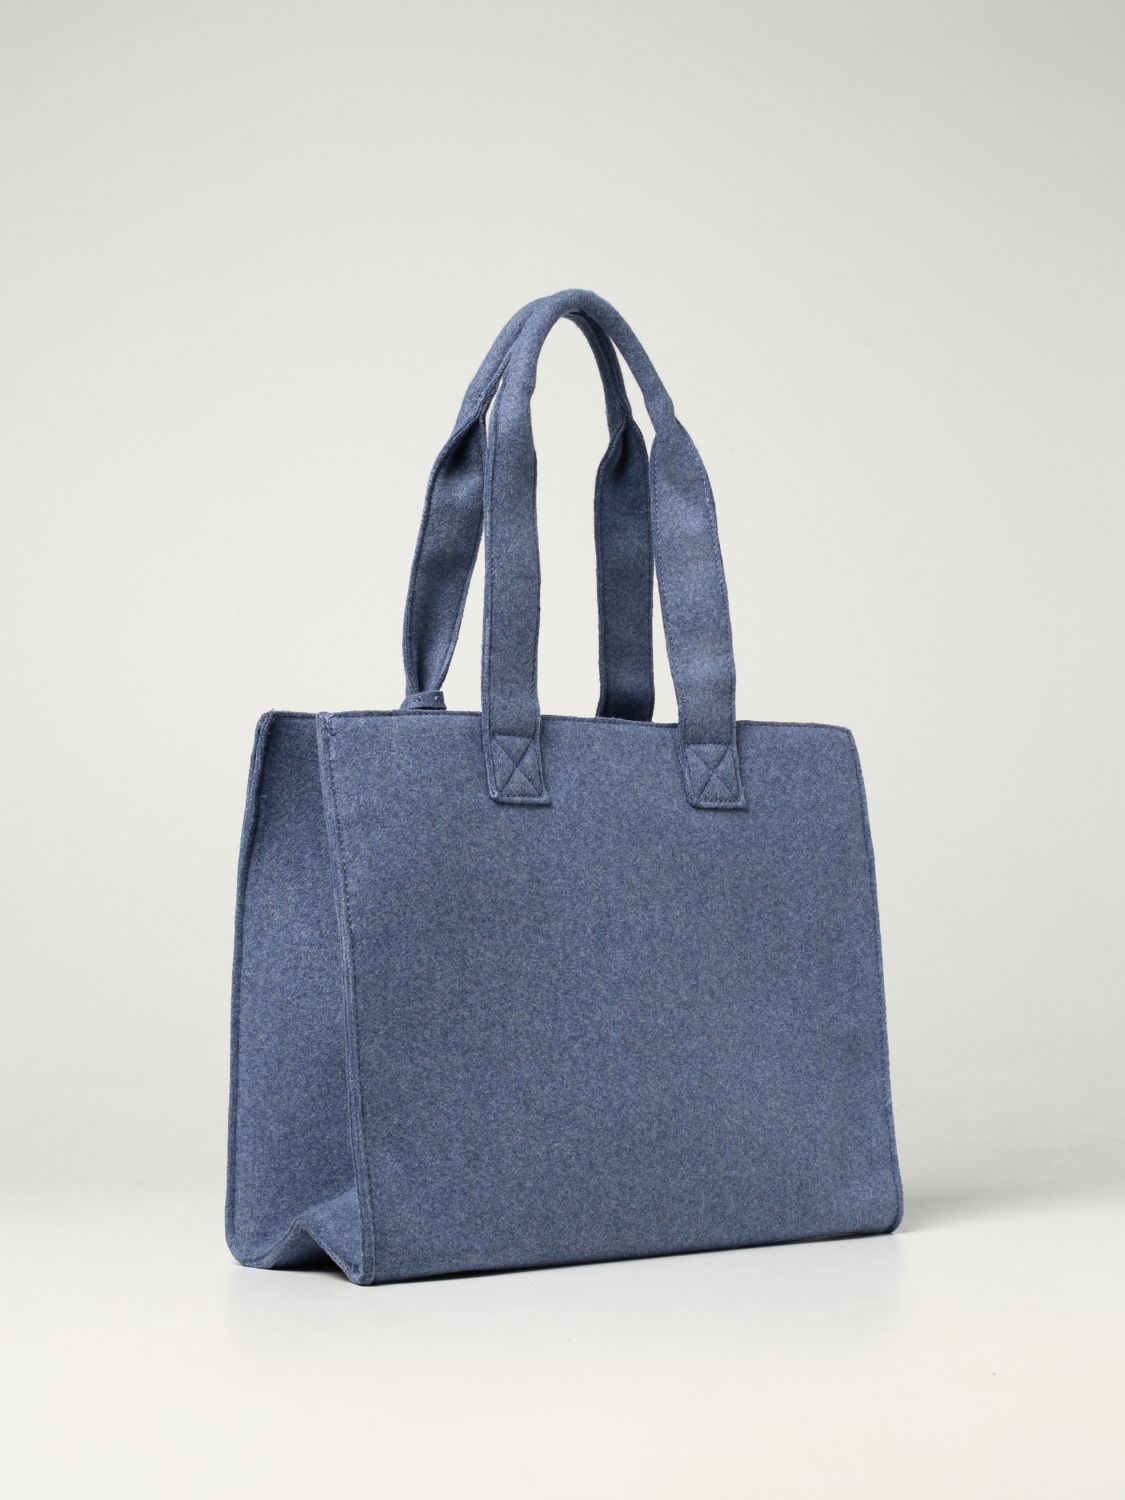 Armani Exchange Outlet: tote bags for woman - Sky Blue  Armani Exchange tote  bags 9428953R708 online at